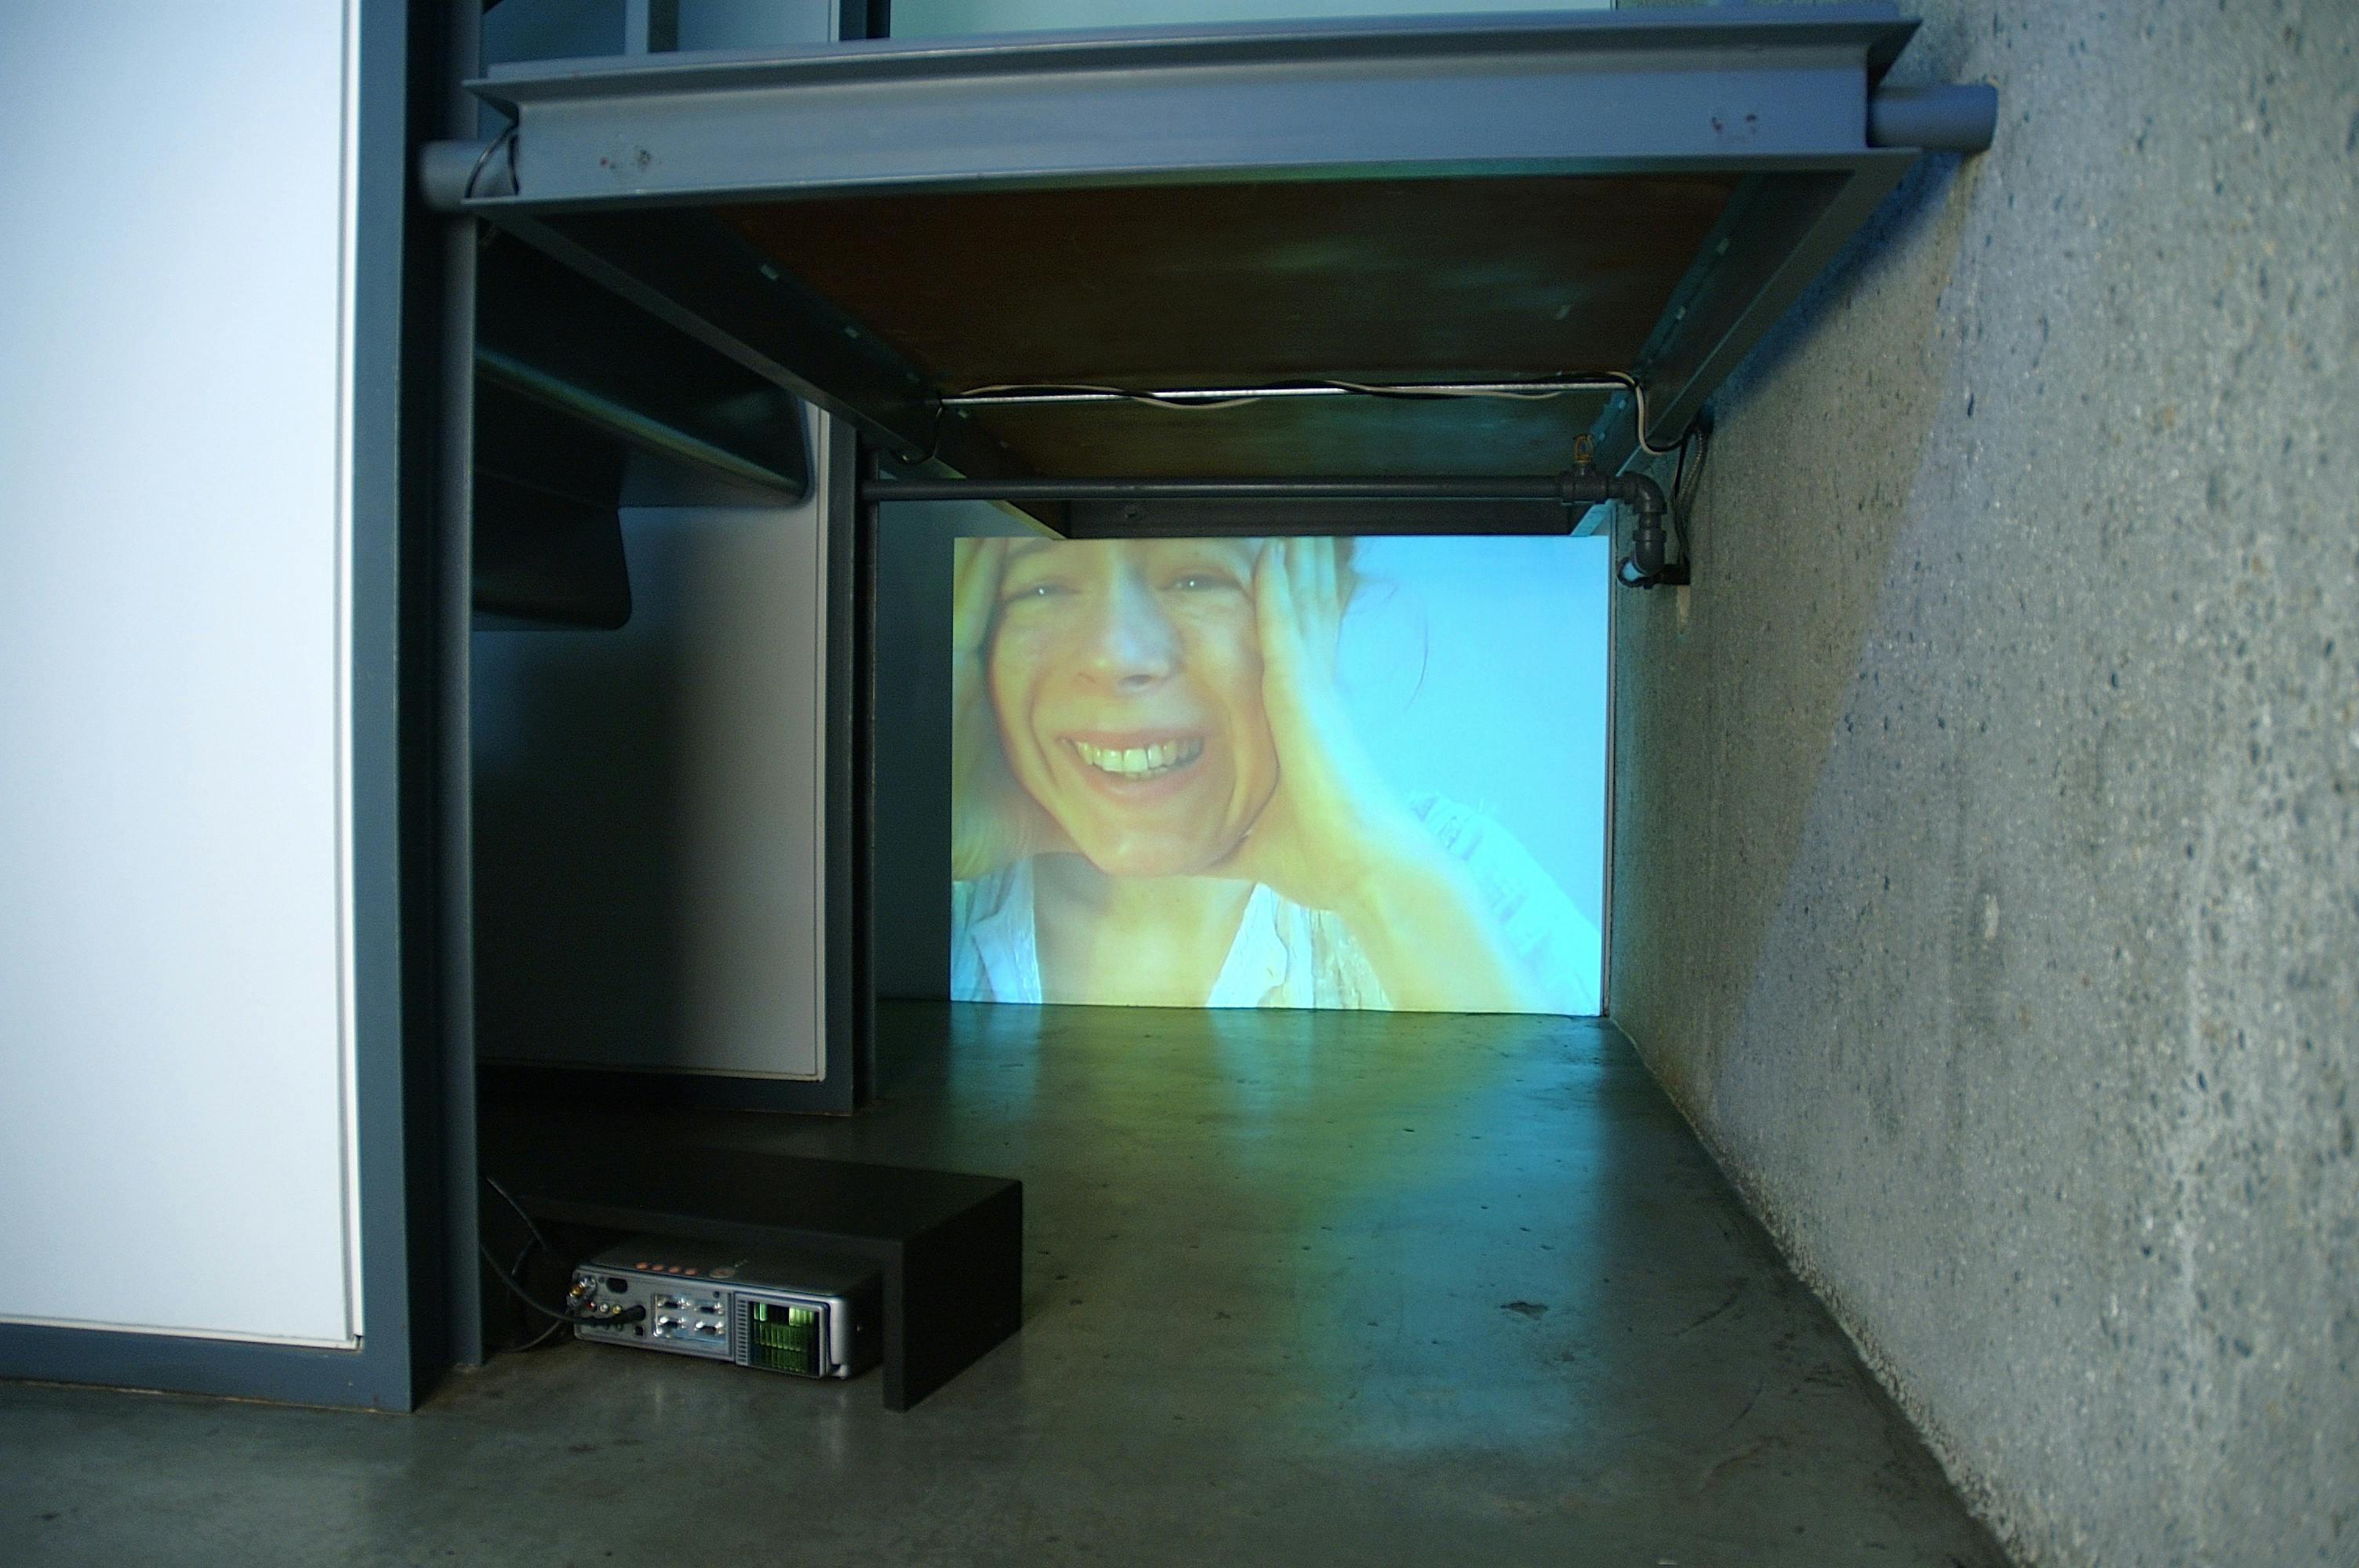 An installation image of a video projected on a wall below the staircase. The video shows an image of a person covering both sides of their head with their own hands.